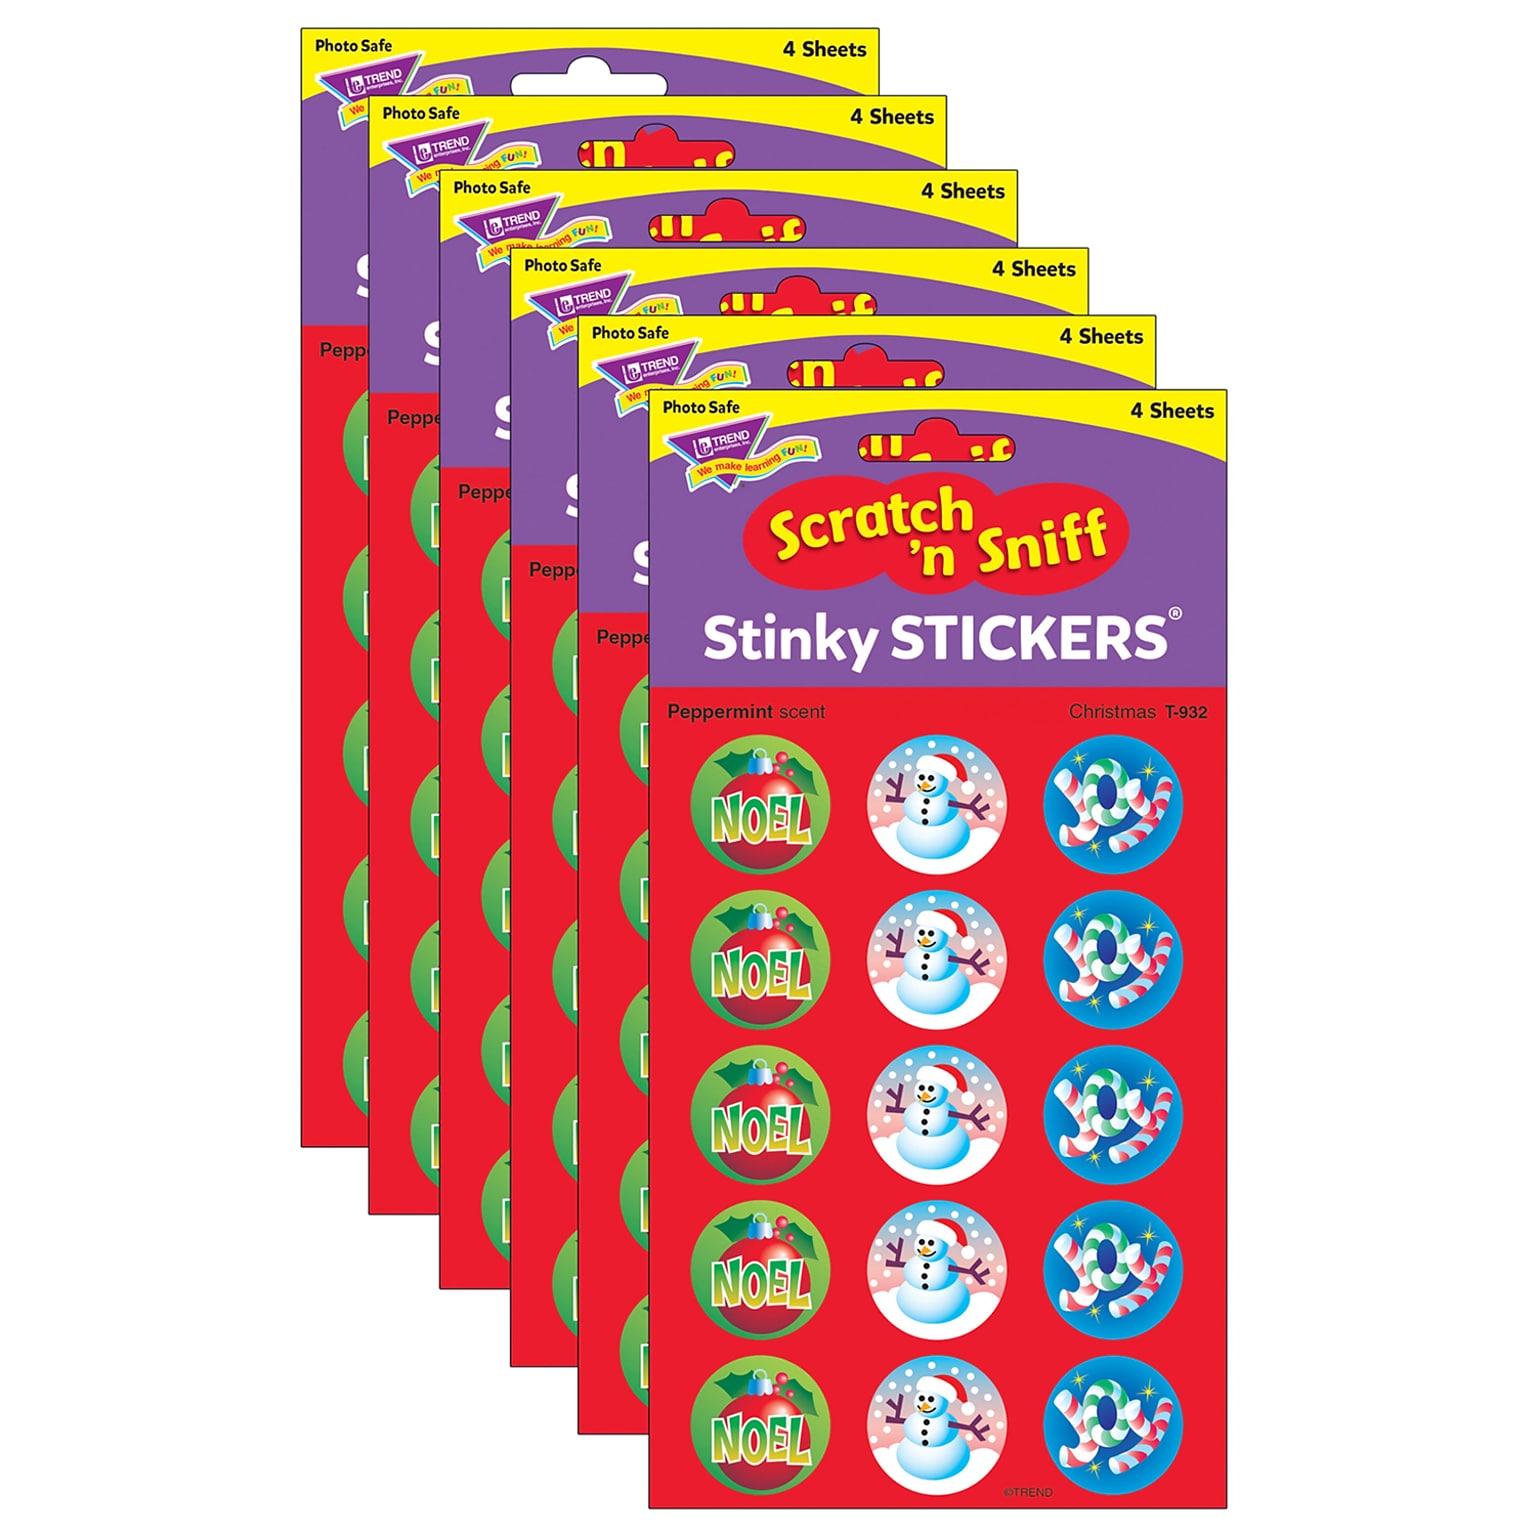 Trend Christmas/Peppermint Stinky Stickers, 60/Pack, 6 Packs (T-932-6)